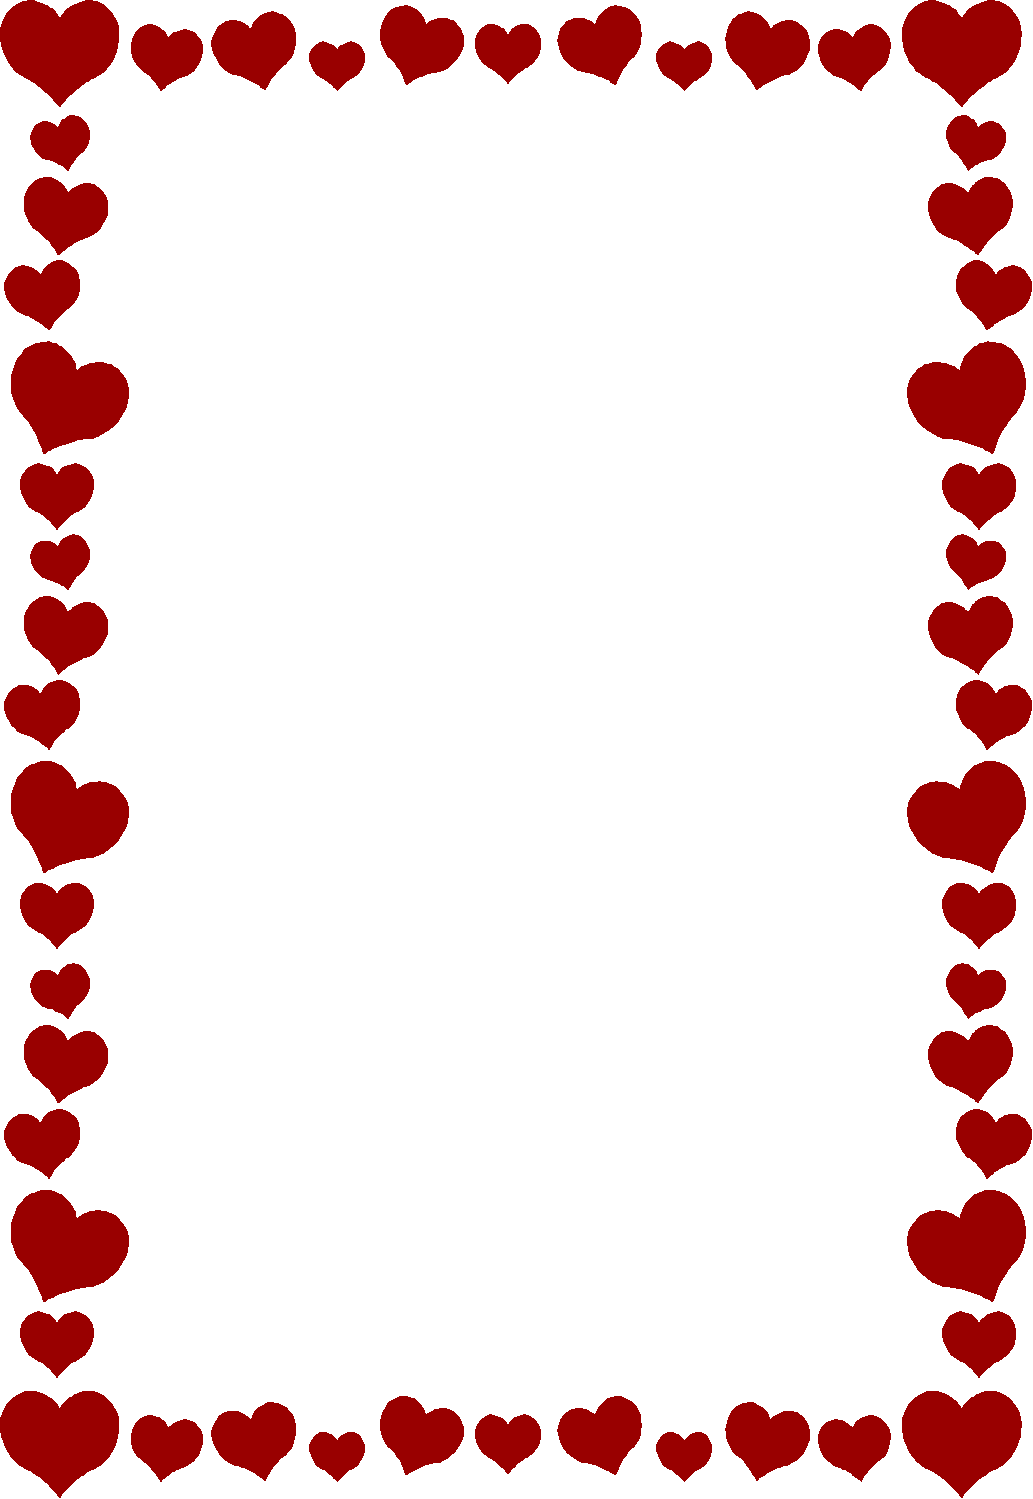 Heart Border Clipart Image Search Results